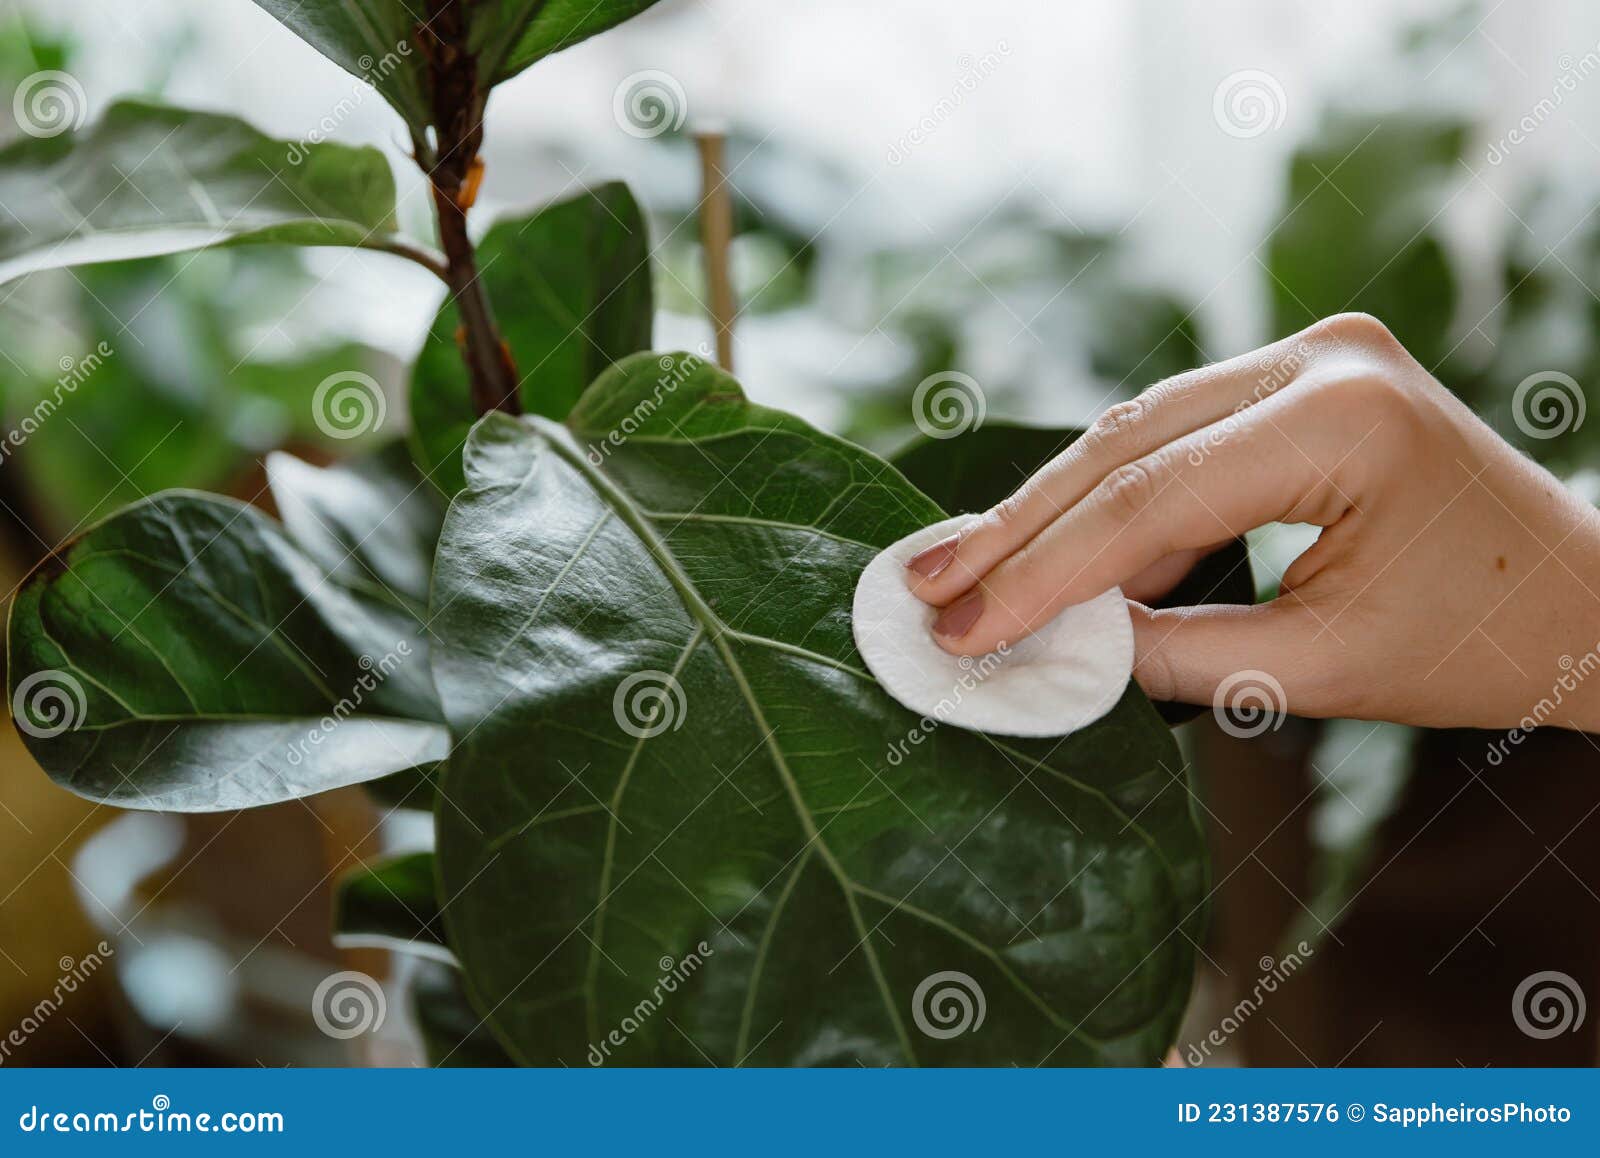 der ovre kultur Udveksle Woman Hand Wiping Dust Off Green Leaves of Fiddle Leaf Fig, Ficus Lyrata.  Stock Photo - Image of housekeeping, houseplant: 231387576